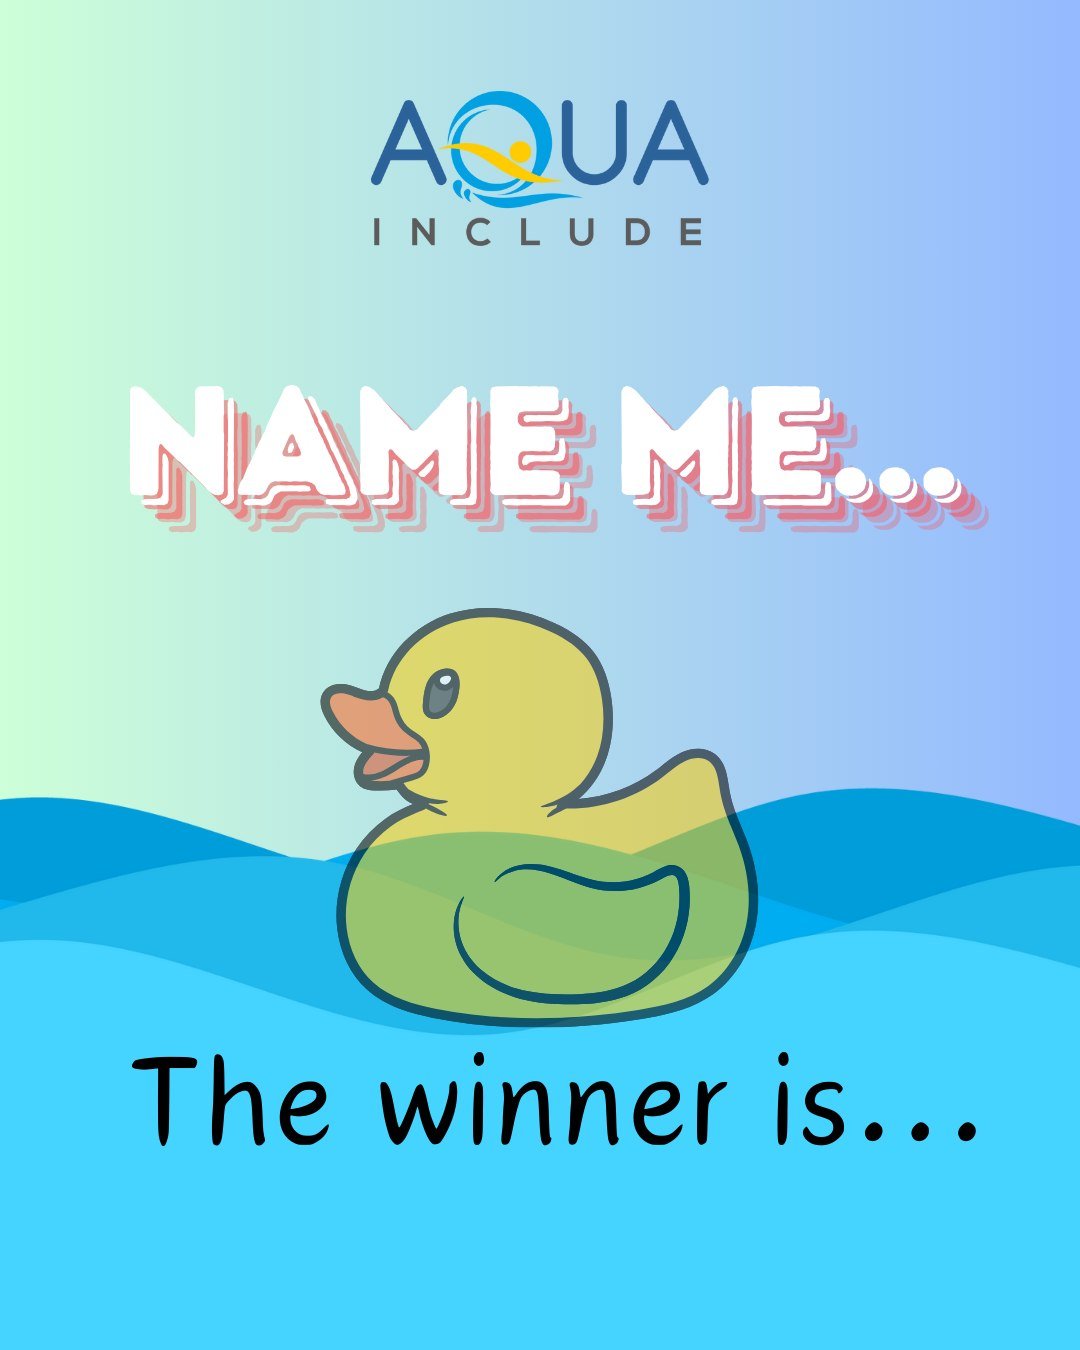 ...qwAQUA!!

We can't wait for qwAQUA to take to the water and do us proud on the 30th June! 

🦆🦆🦆🦆🦆🦆